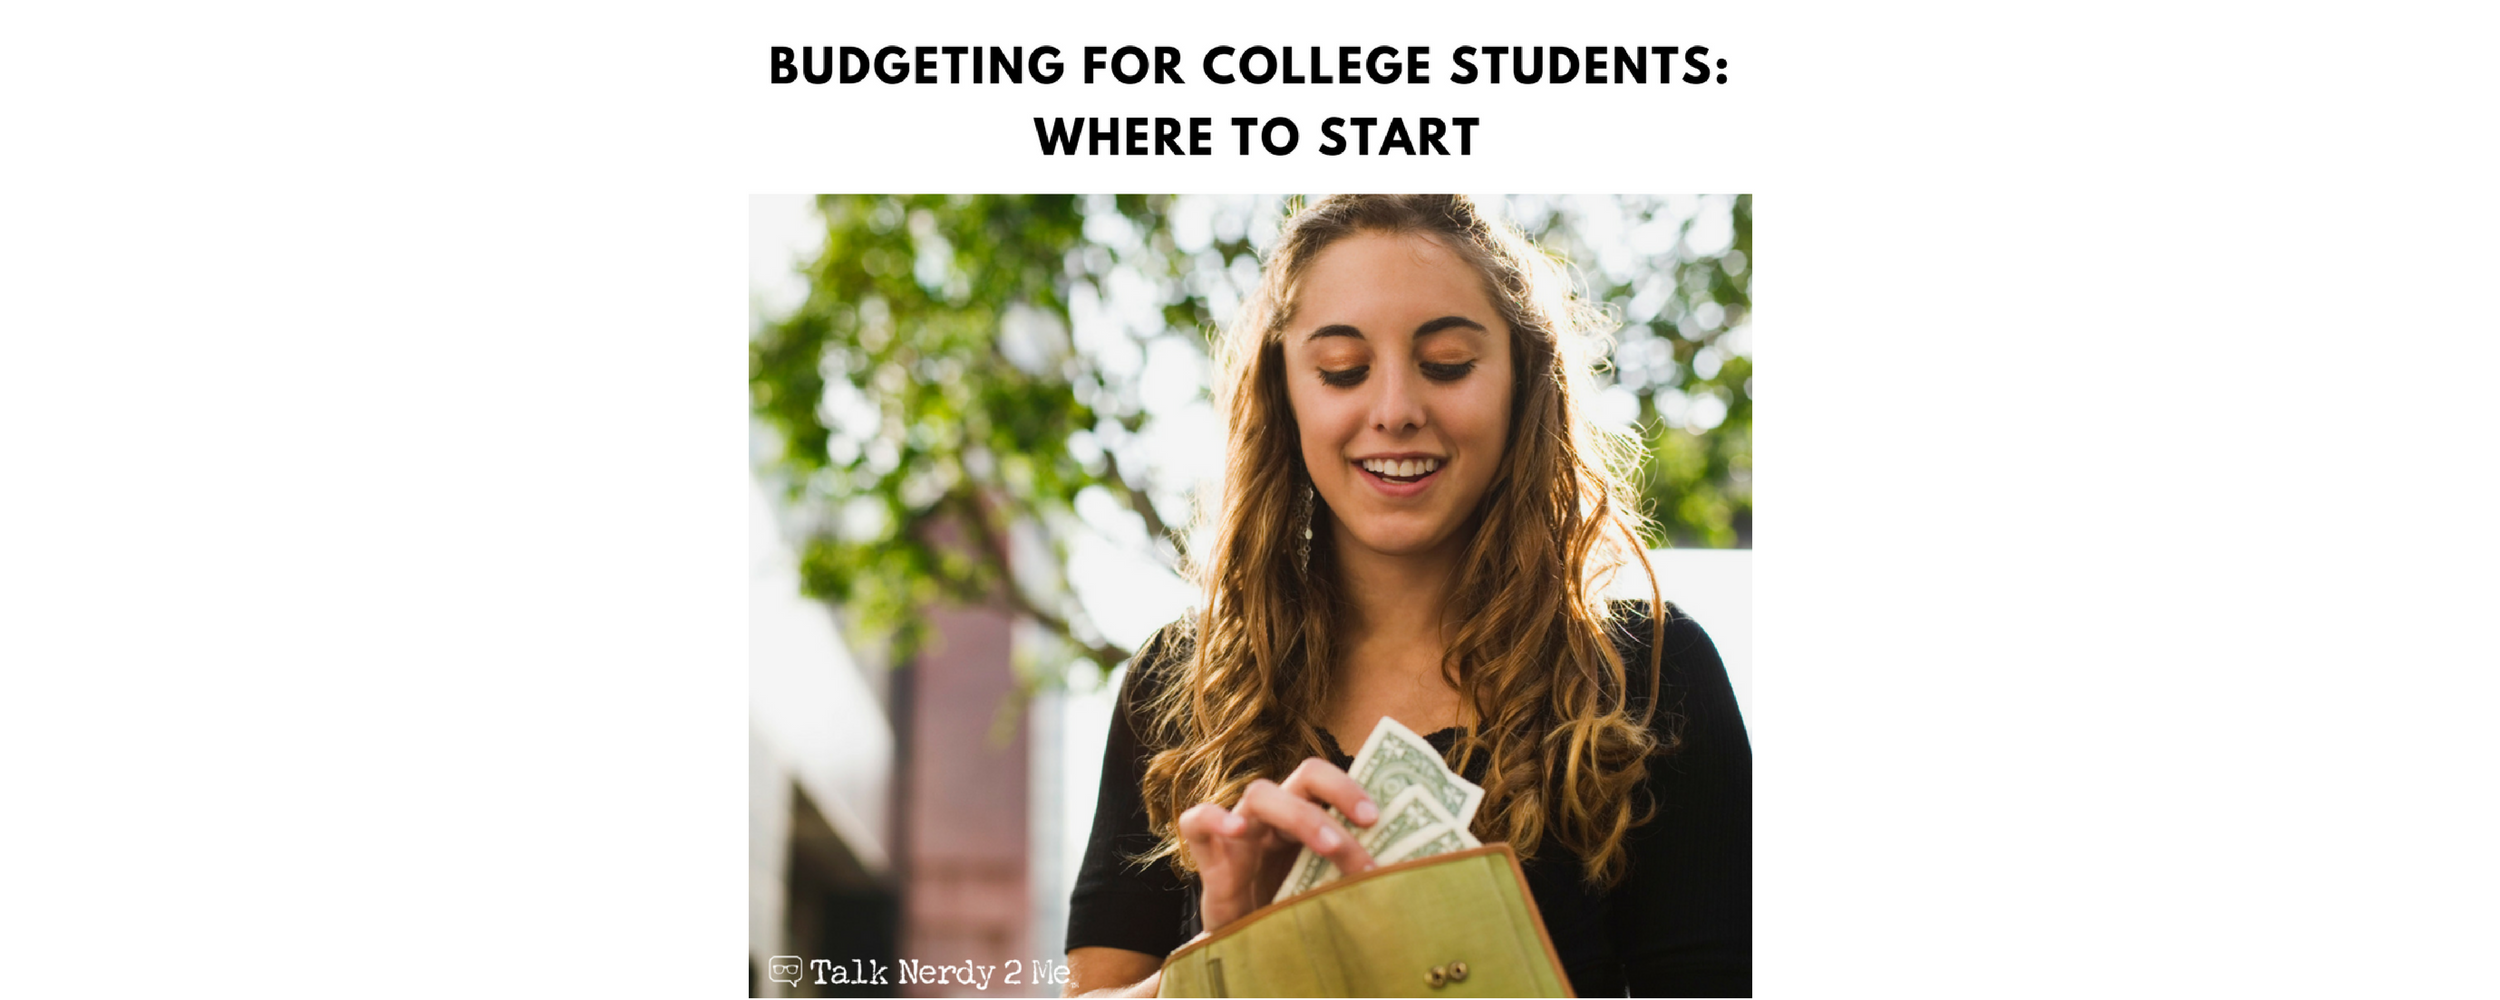 Budgeting for College Students:  Where to Start